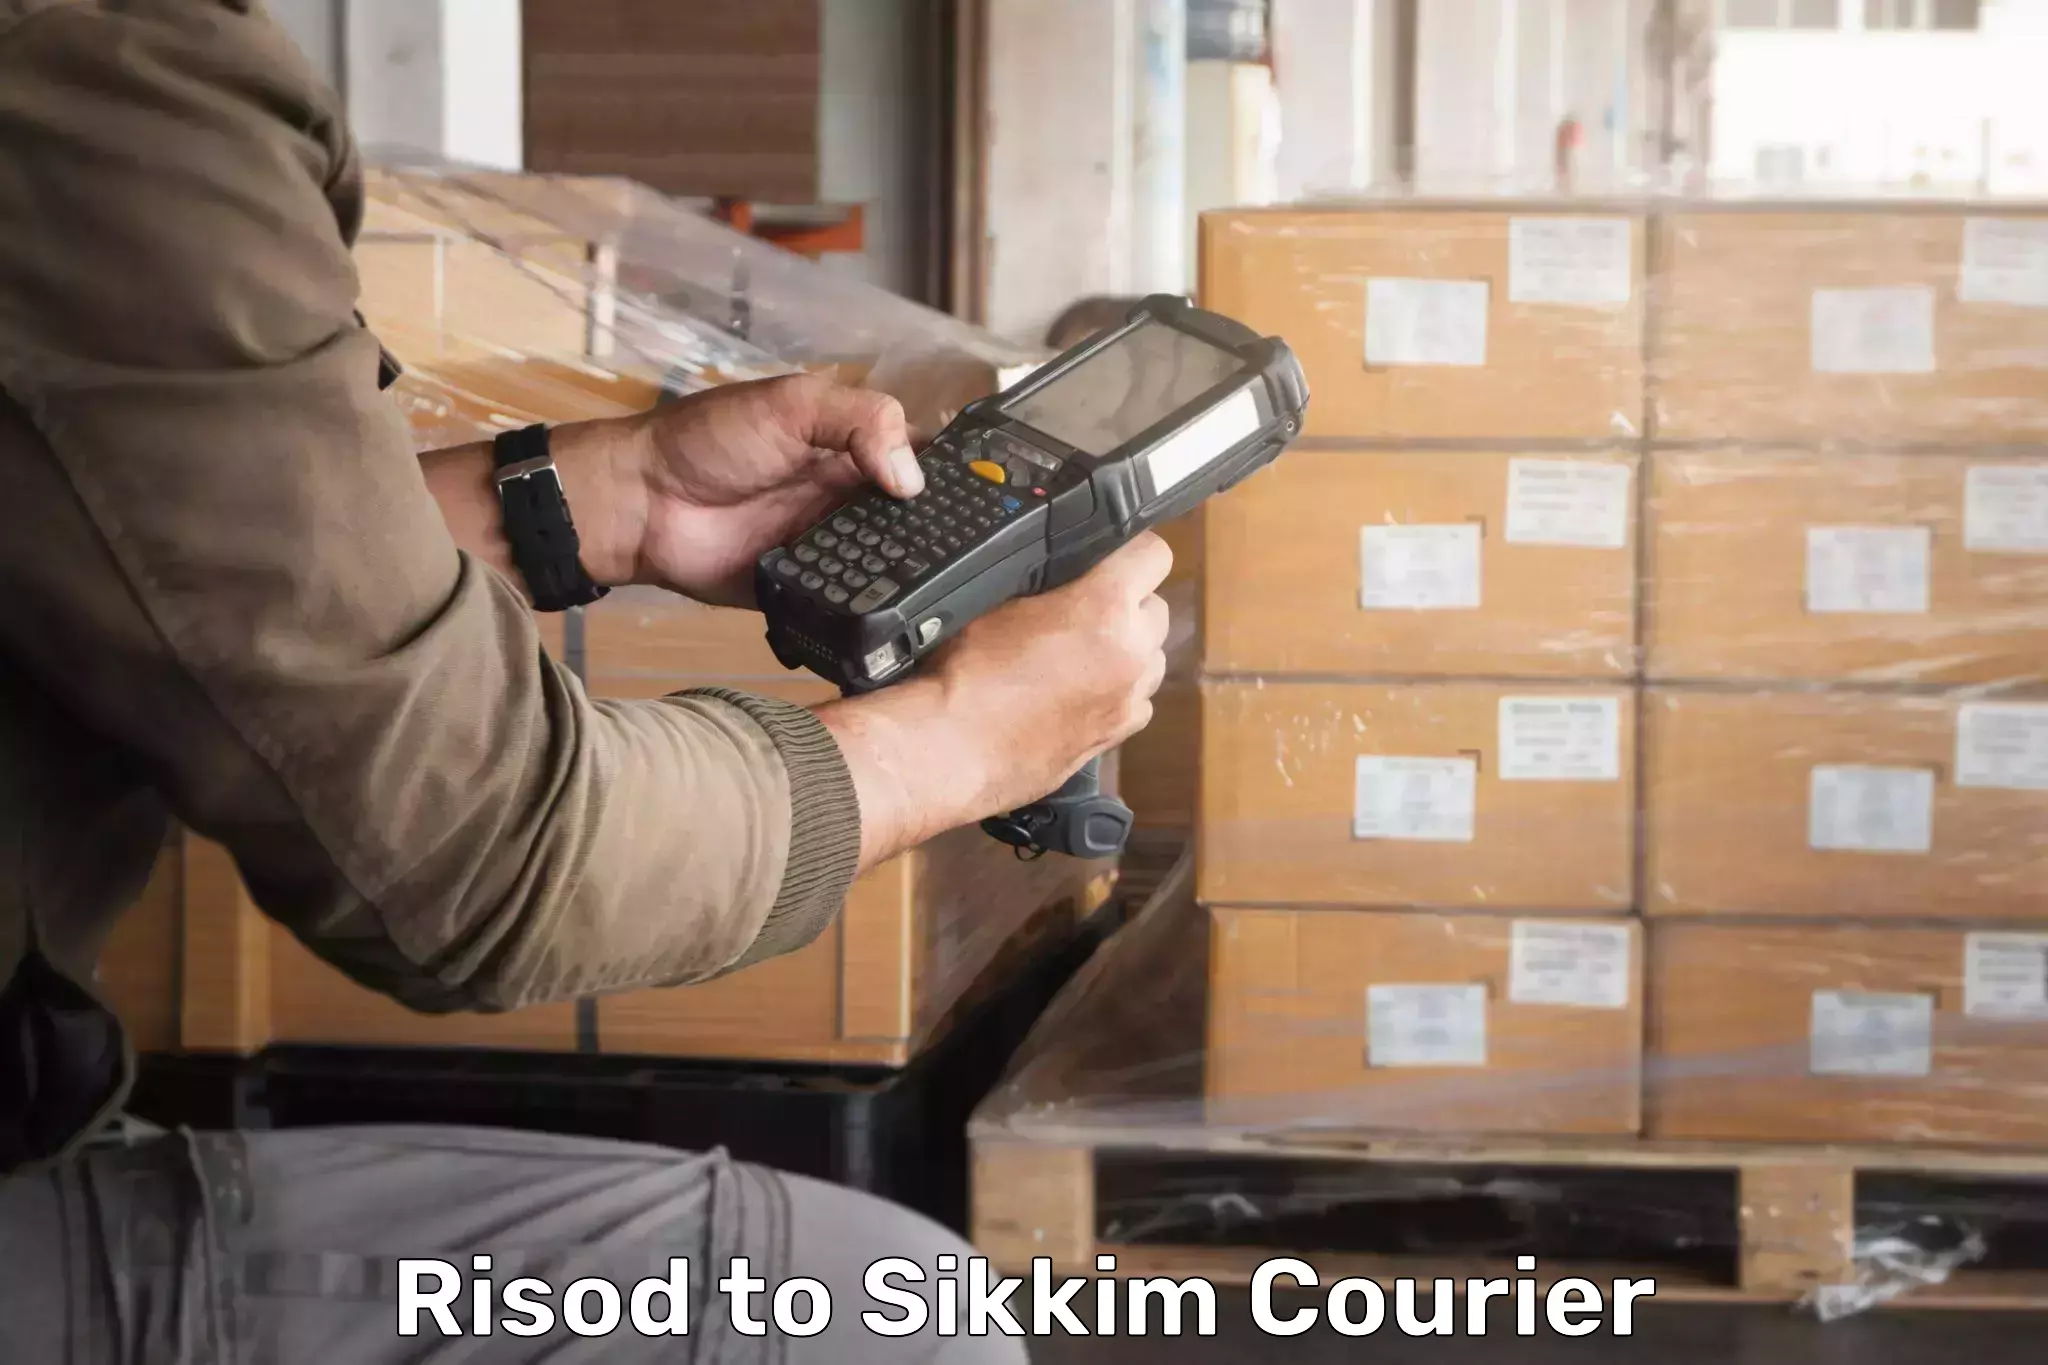 Customer-centric shipping Risod to Sikkim